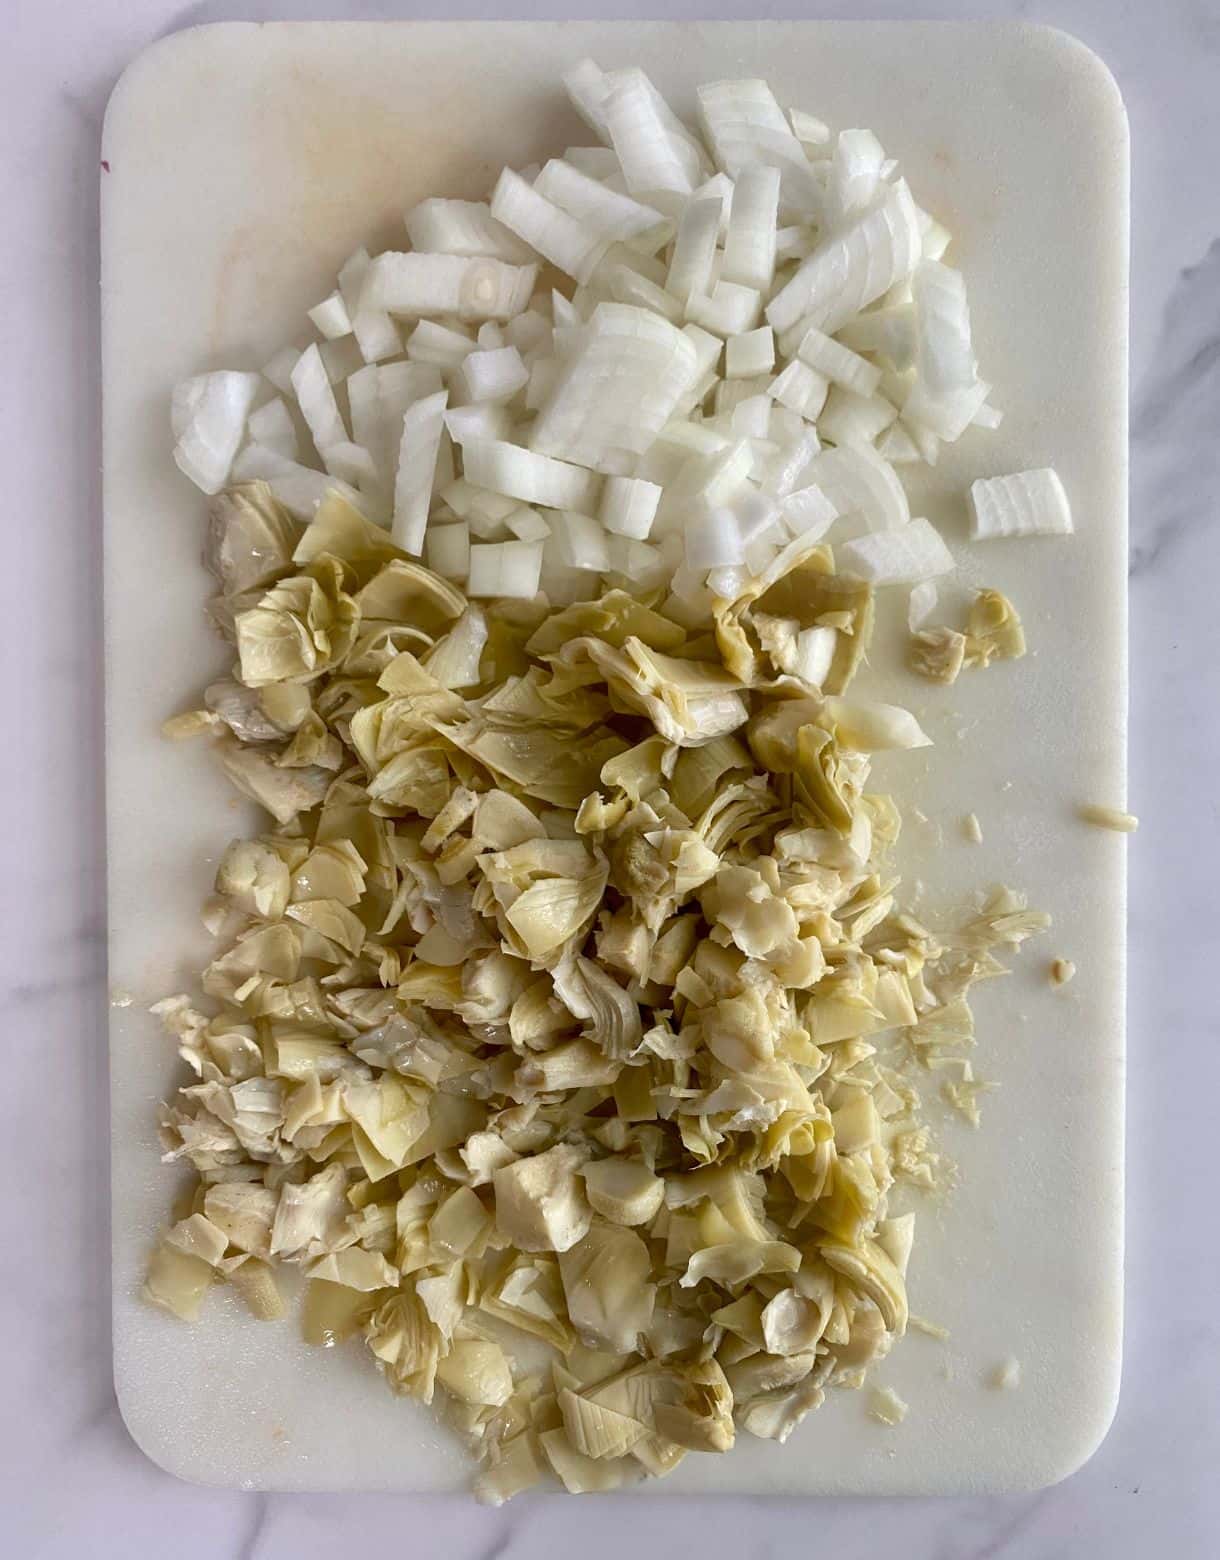 A cutting board with diced onion and artichoke hearts.